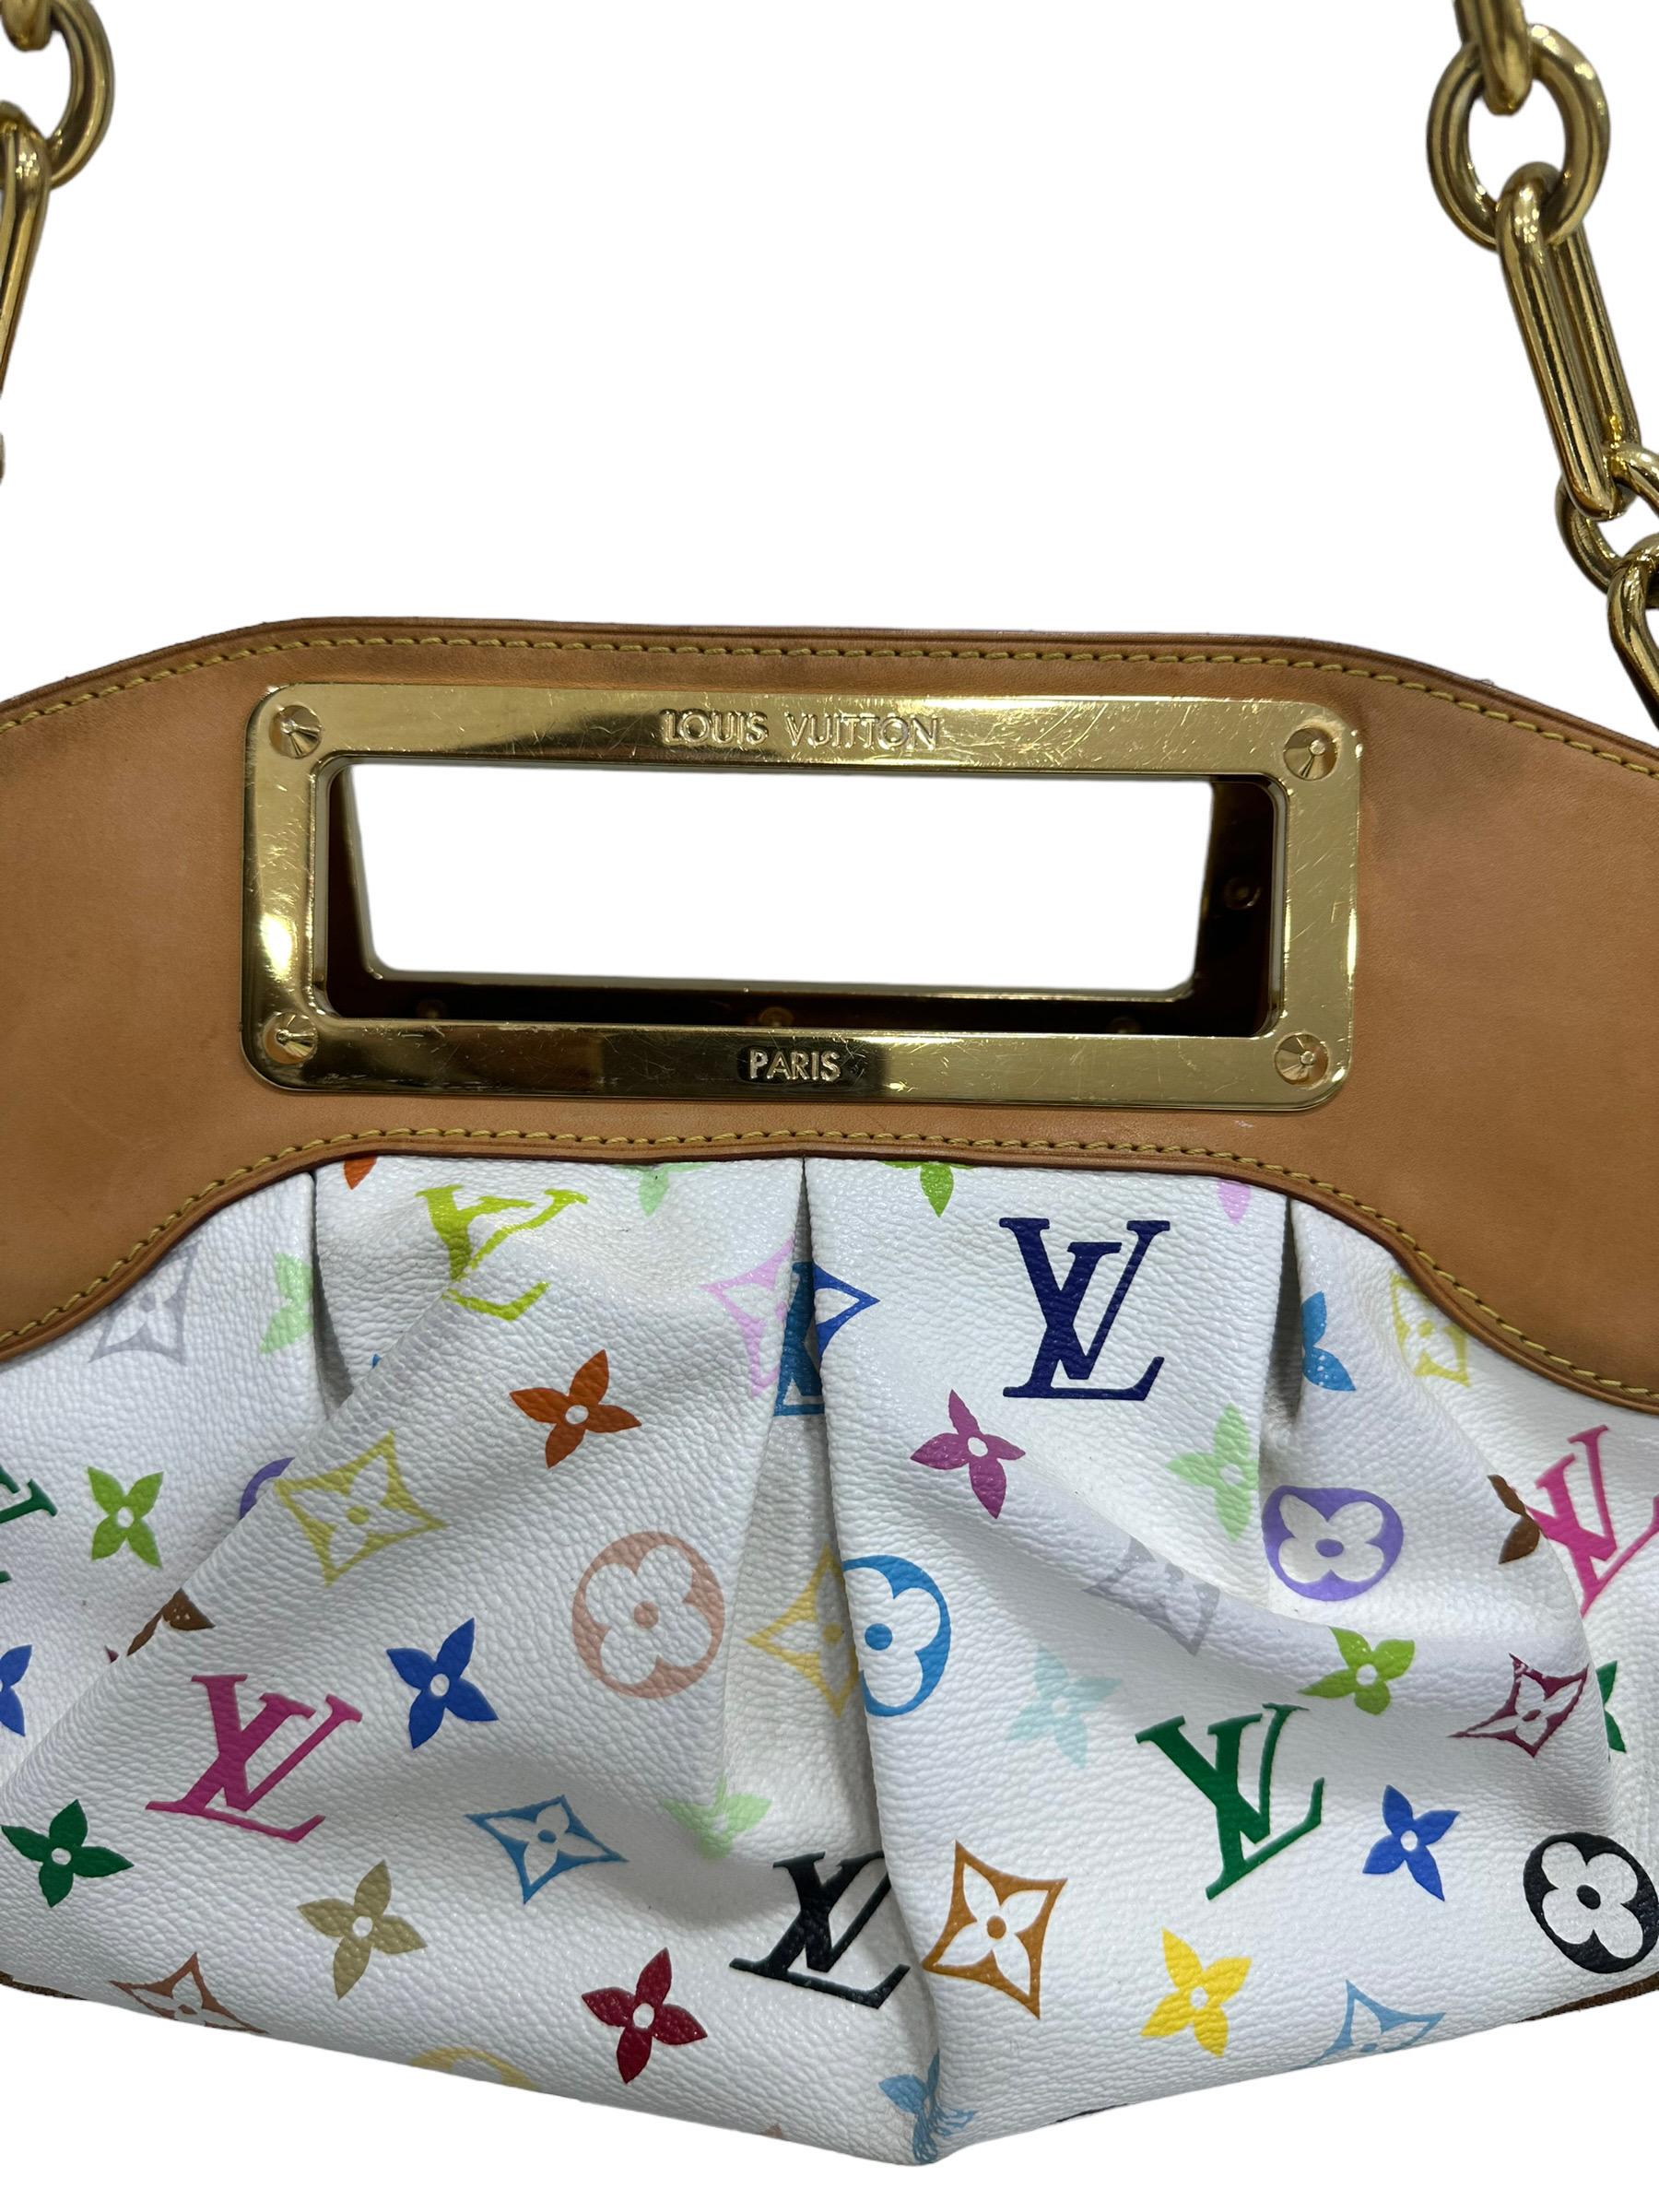 Louis Vuitton bag, Judy model, size PM, limited edition in collaboration with Takashi Murakami. Made of multicolor canvas with a white background, with inserts in cowhide and golden hardwrae. Equipped with a central closure with magnetic button,